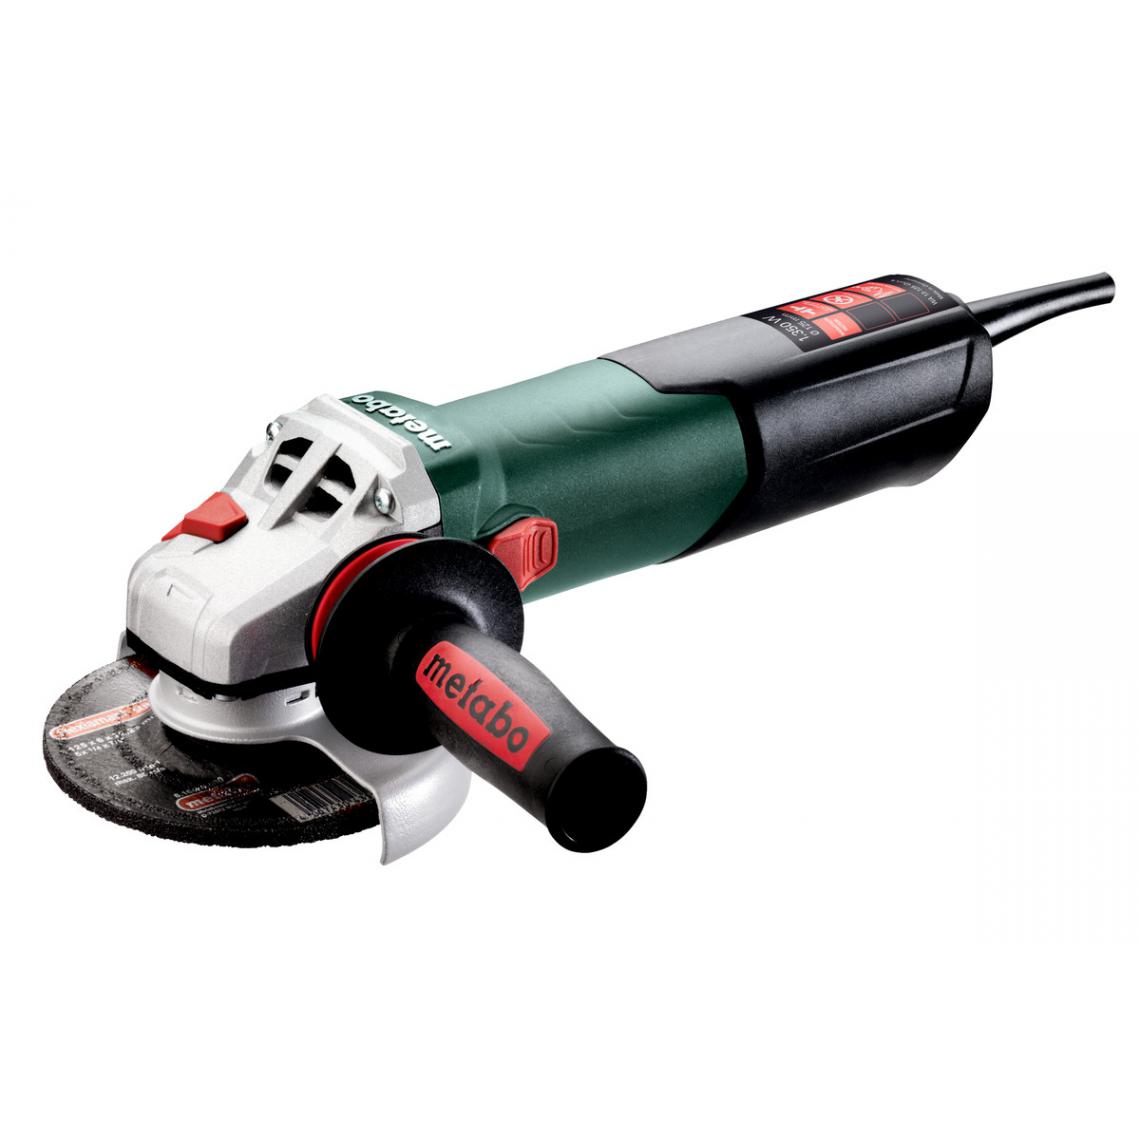 Metabo - Meuleuse Ø125 mm filaire WEA 11-125 QUICK METABO - 603626000 - Meuleuses